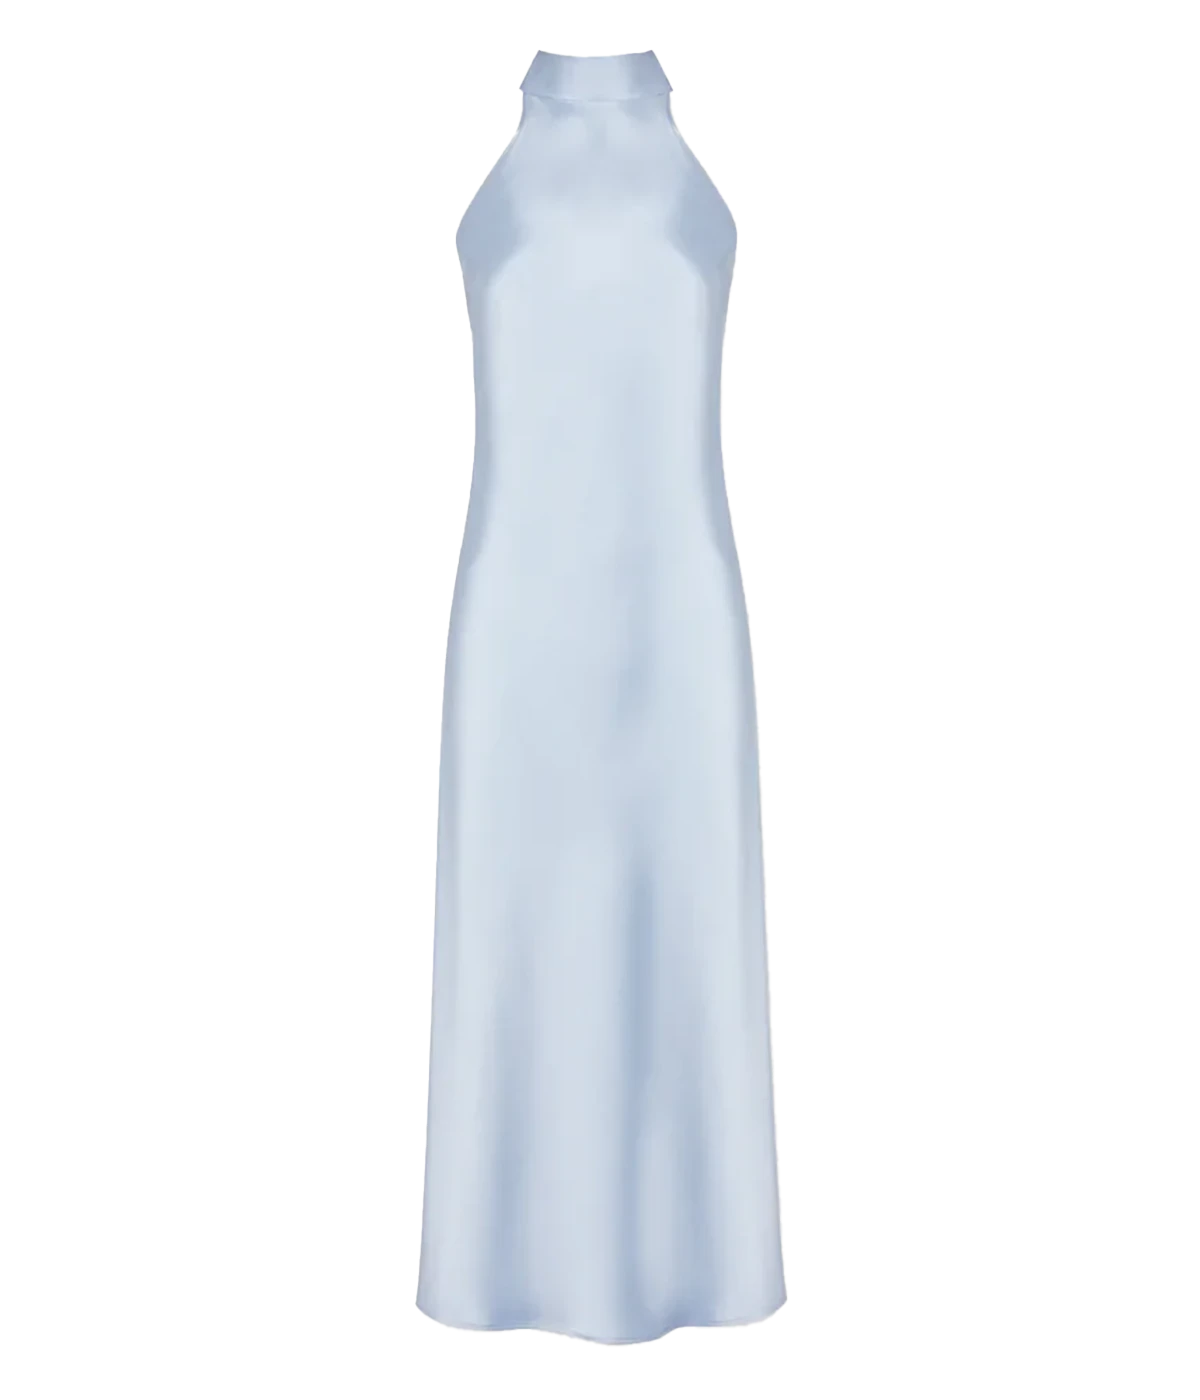 Elevated elegant midi dress in a cloud blue with high neck tie up detail and sheer side paneling. Special occasion, formal wear , bra friendly, made internationally, comfortable, wedding.